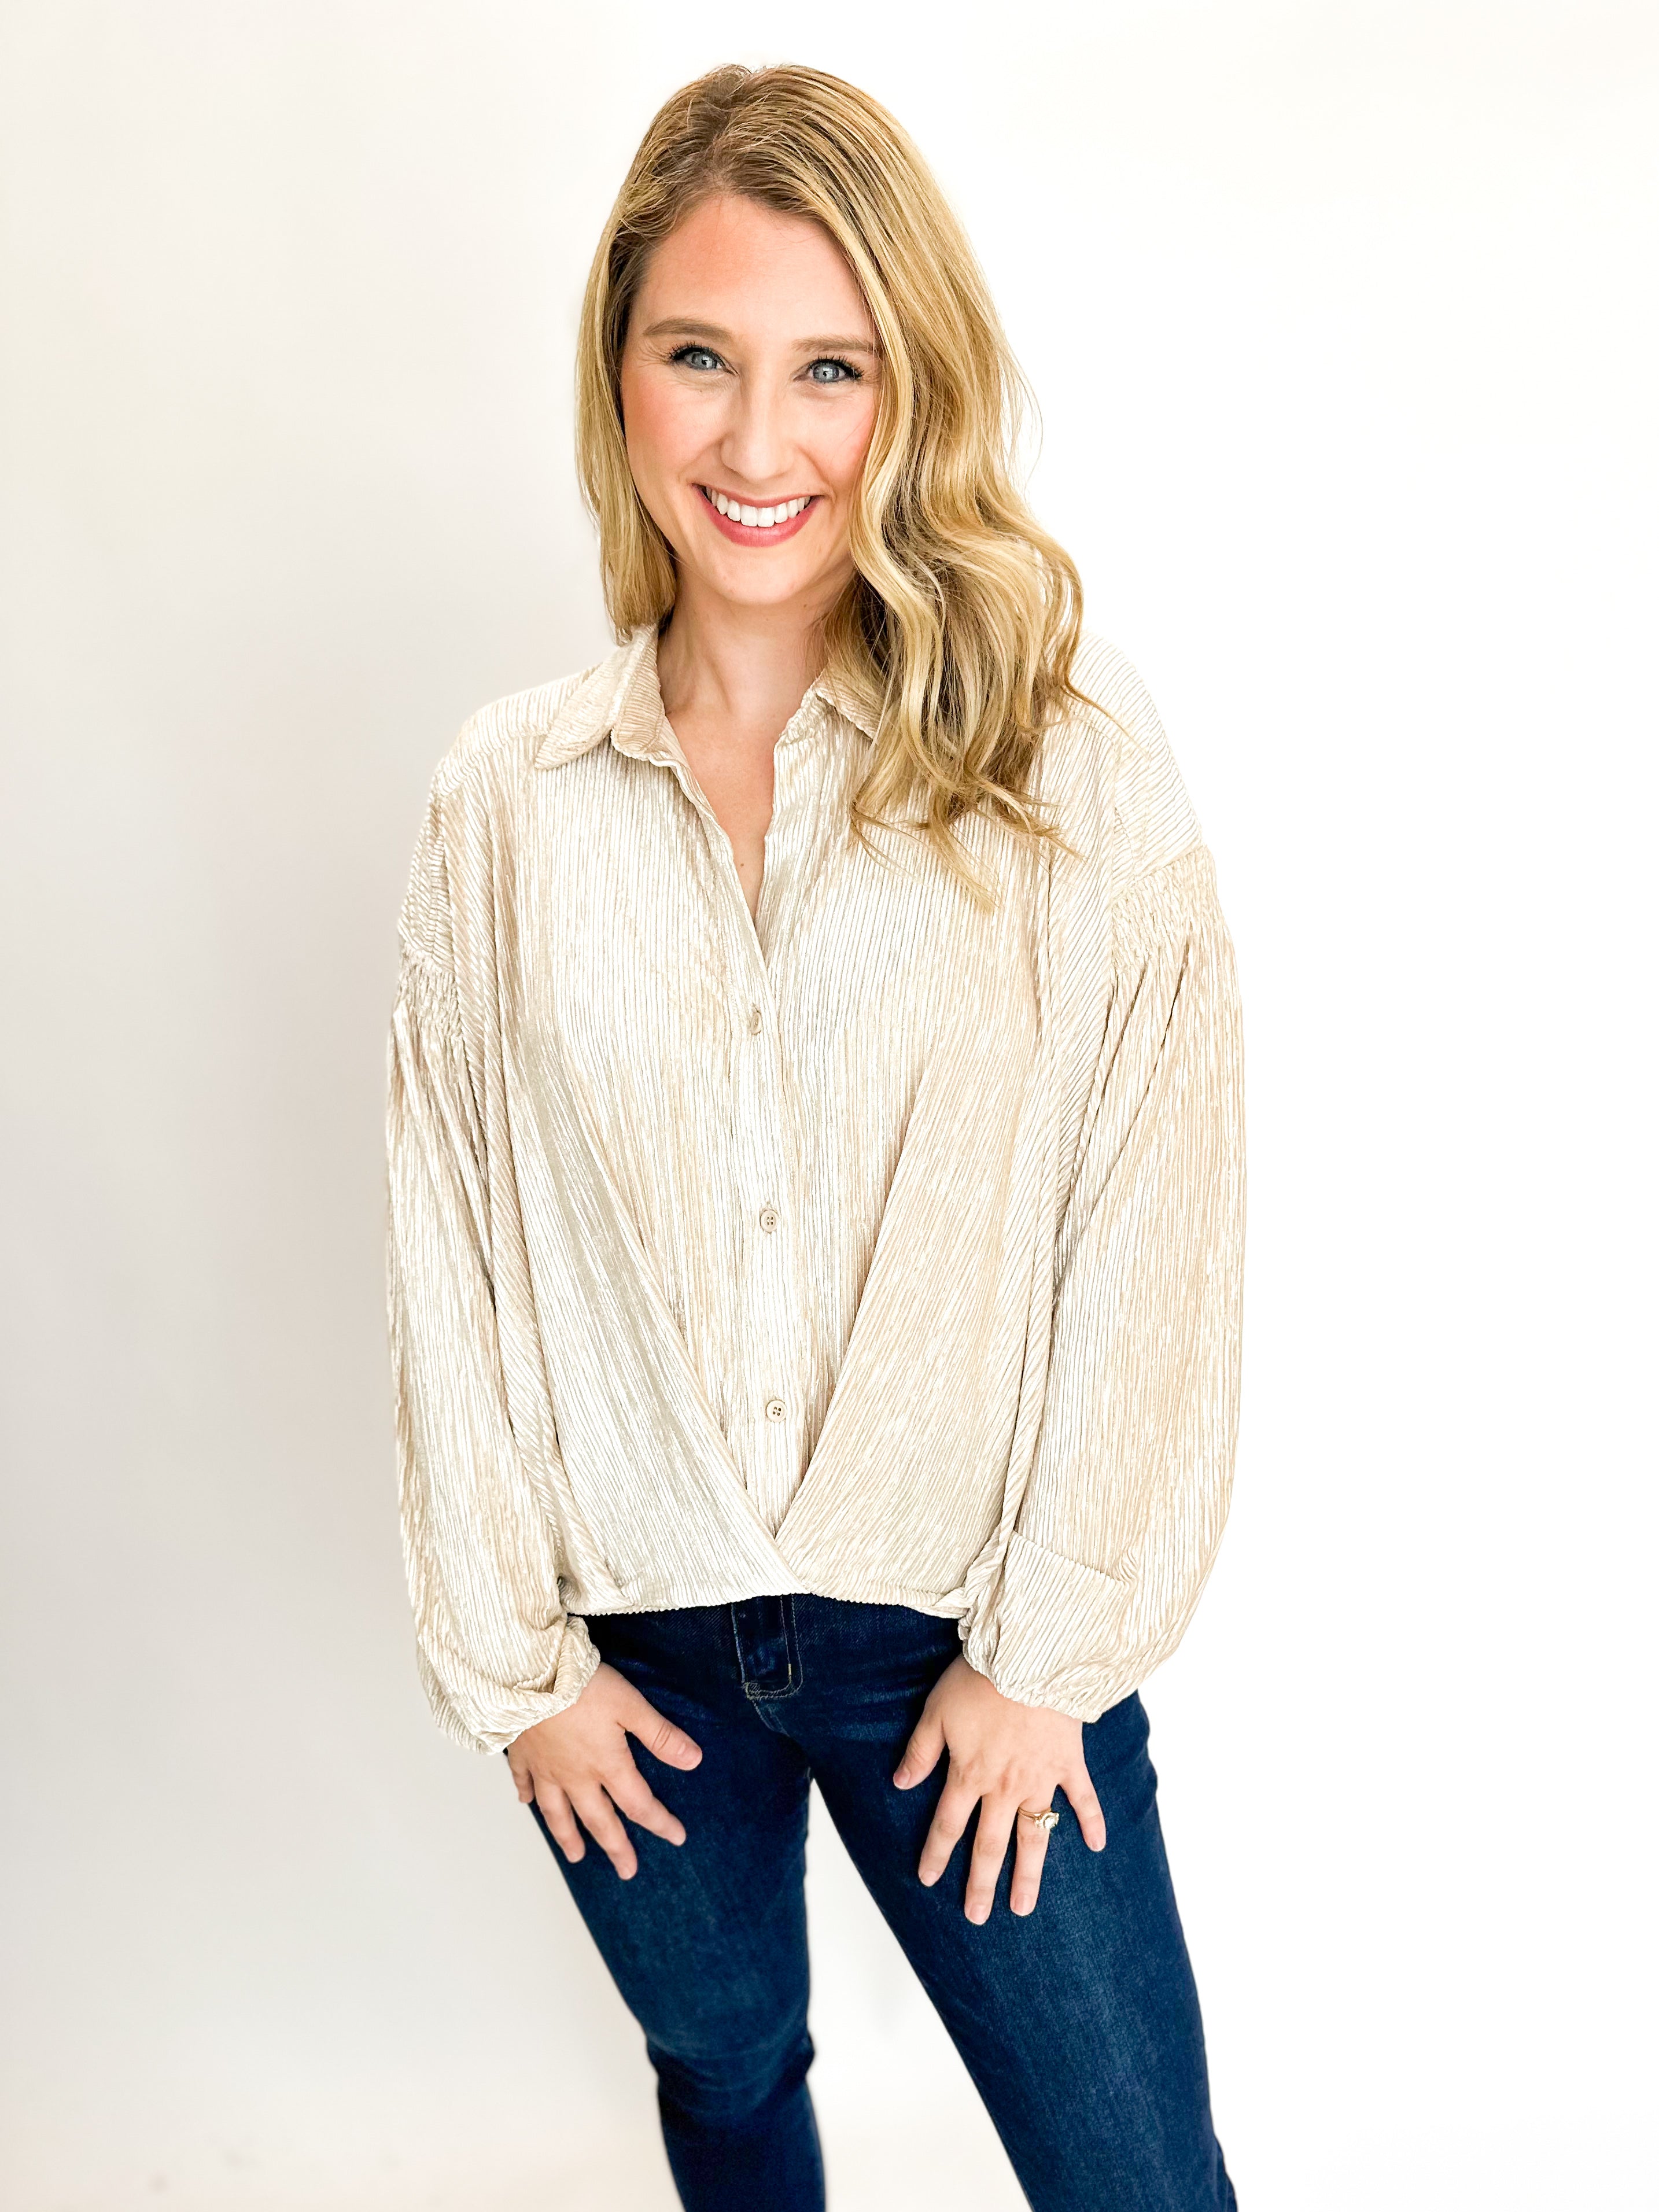 Textured Velvet Blouse - Cream-200 Fashion Blouses-SKIES ARE BLUE-July & June Women's Fashion Boutique Located in San Antonio, Texas